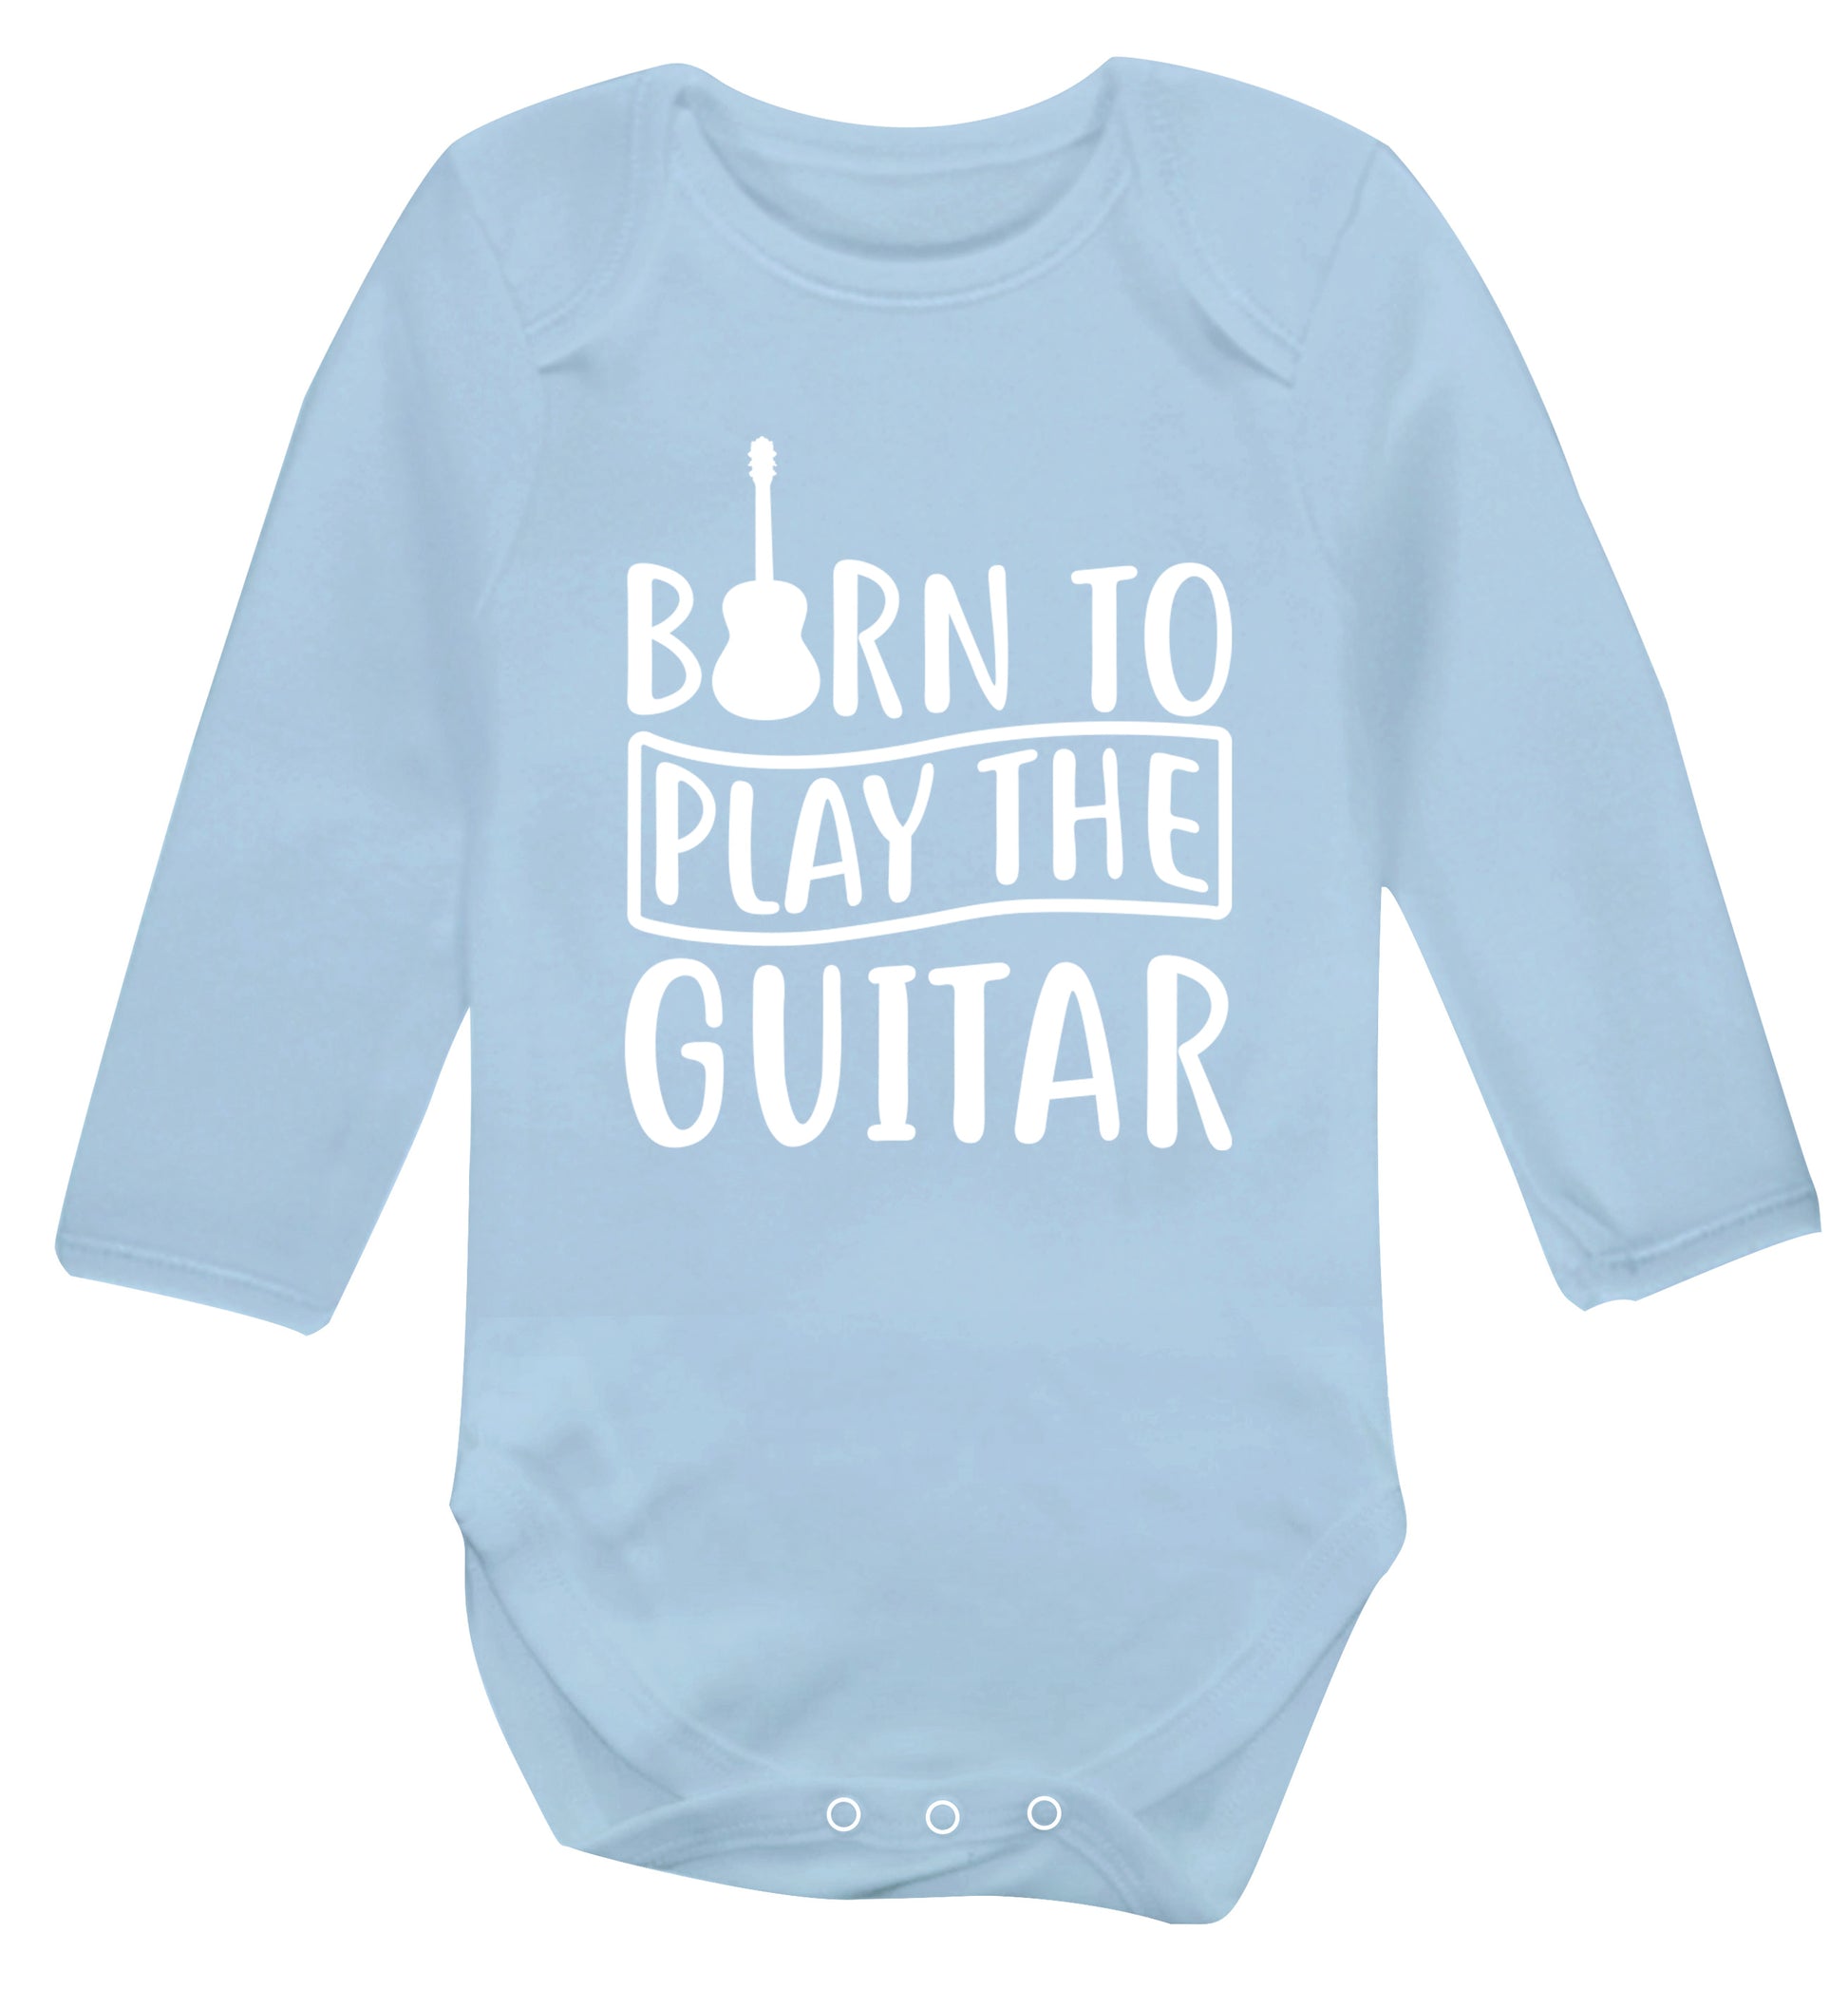 Born to play the guitar Baby Vest long sleeved pale blue 6-12 months